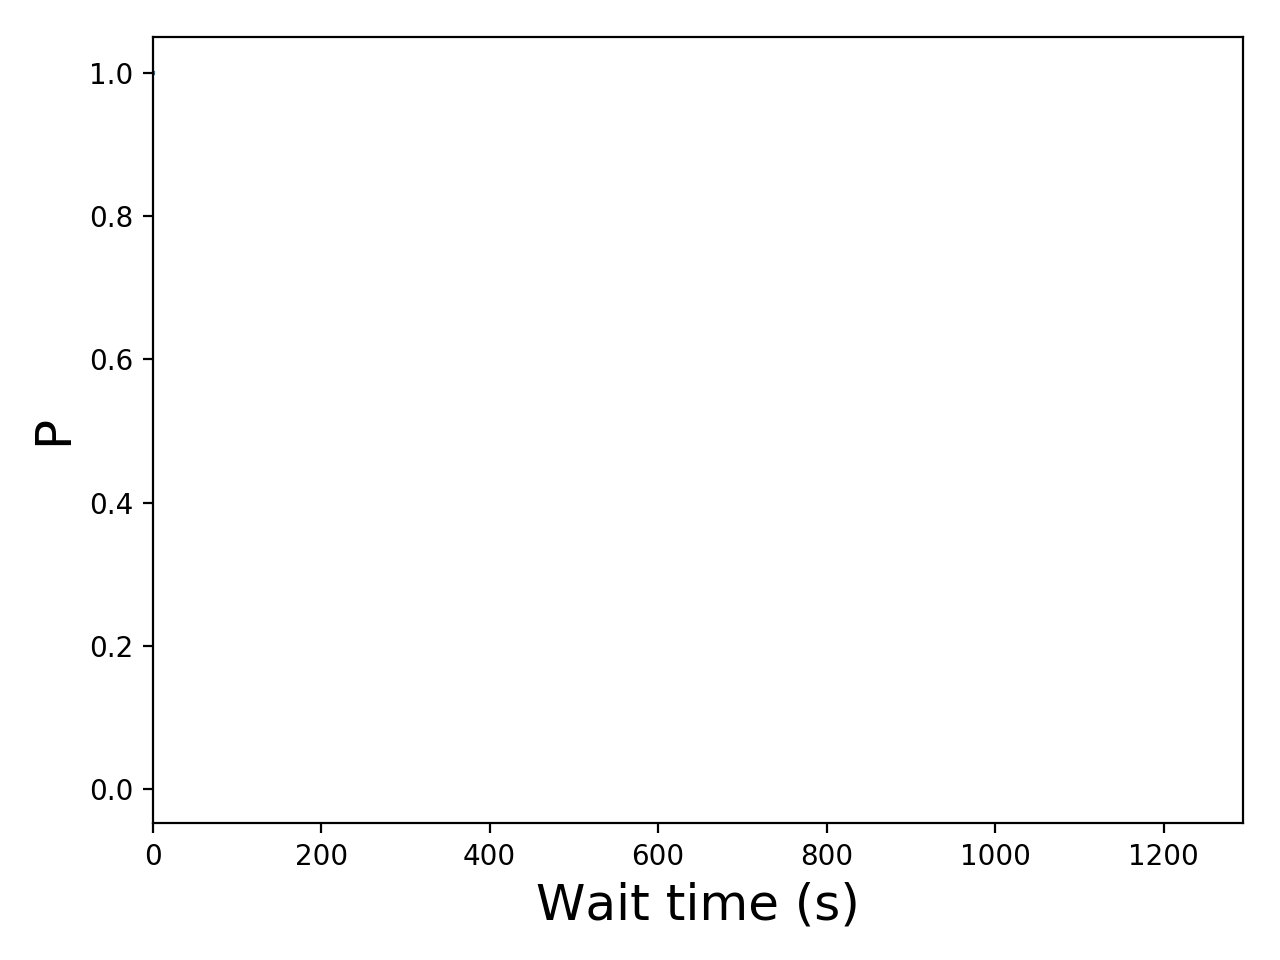 Task wait time CDF graph for the askalon-new_ee58 trace.